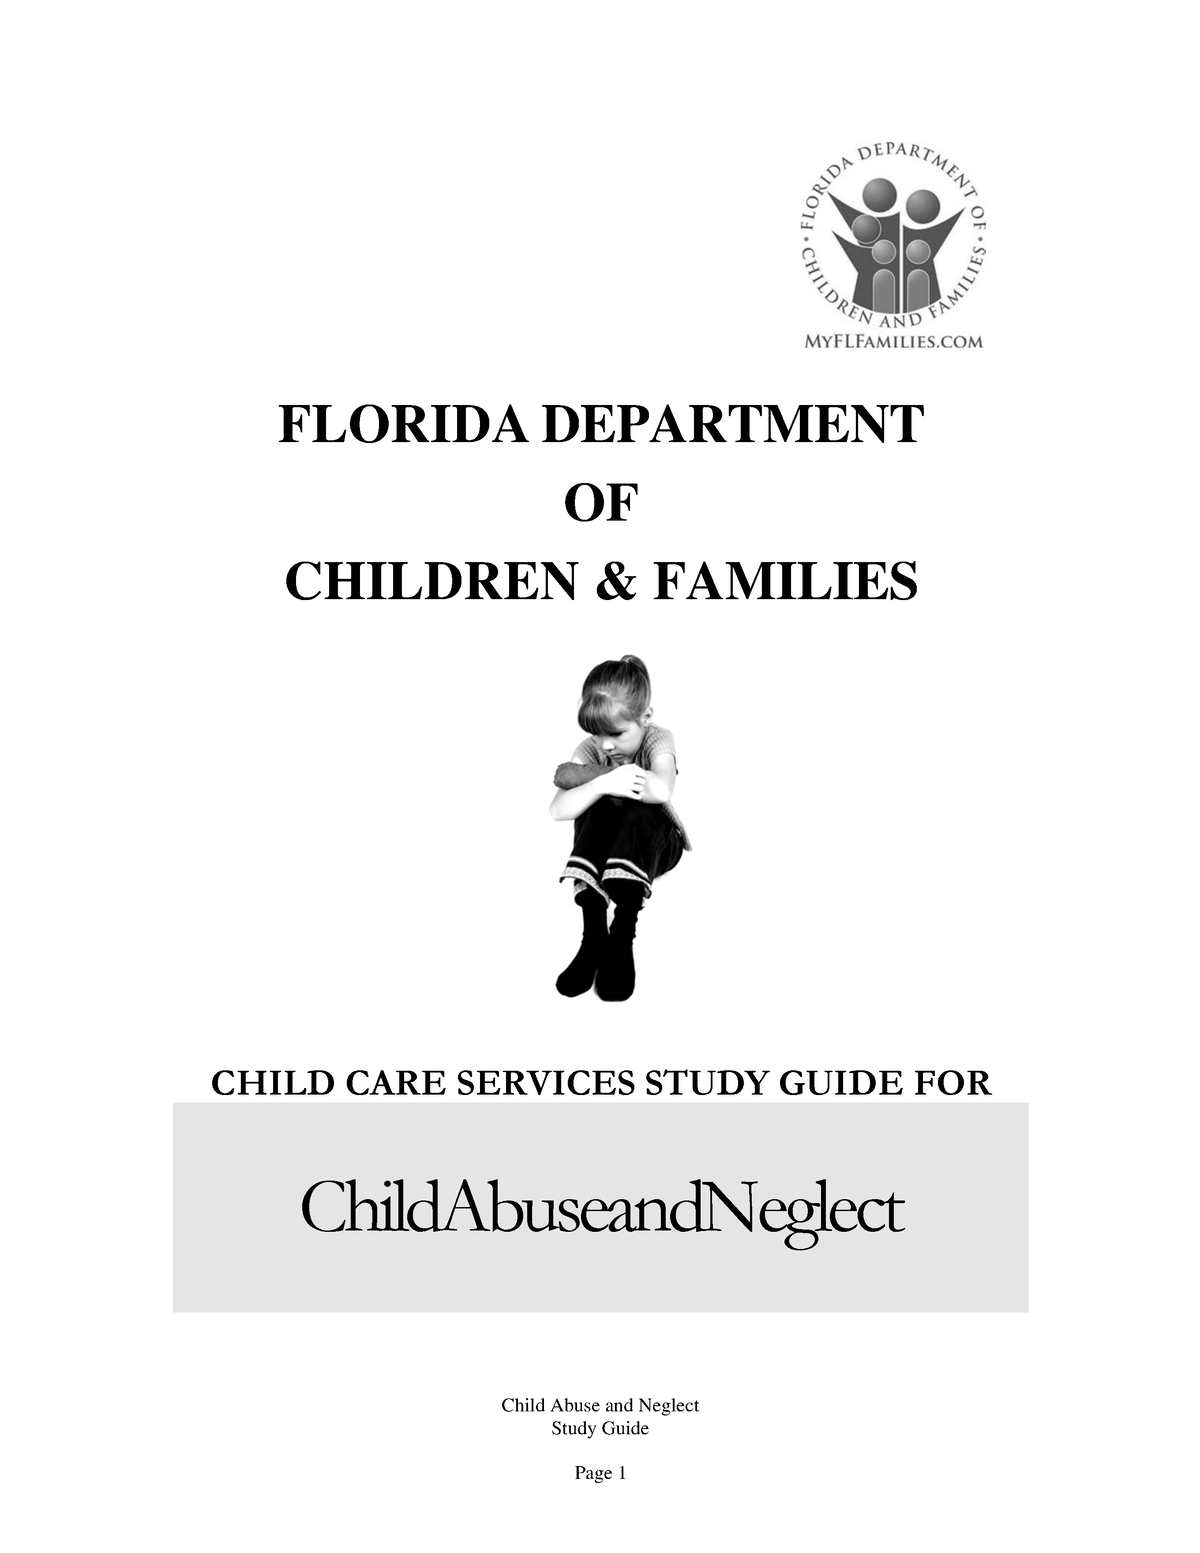 caan-study-guide-dcf-child-abuse-and-neglect-caan-study-guide